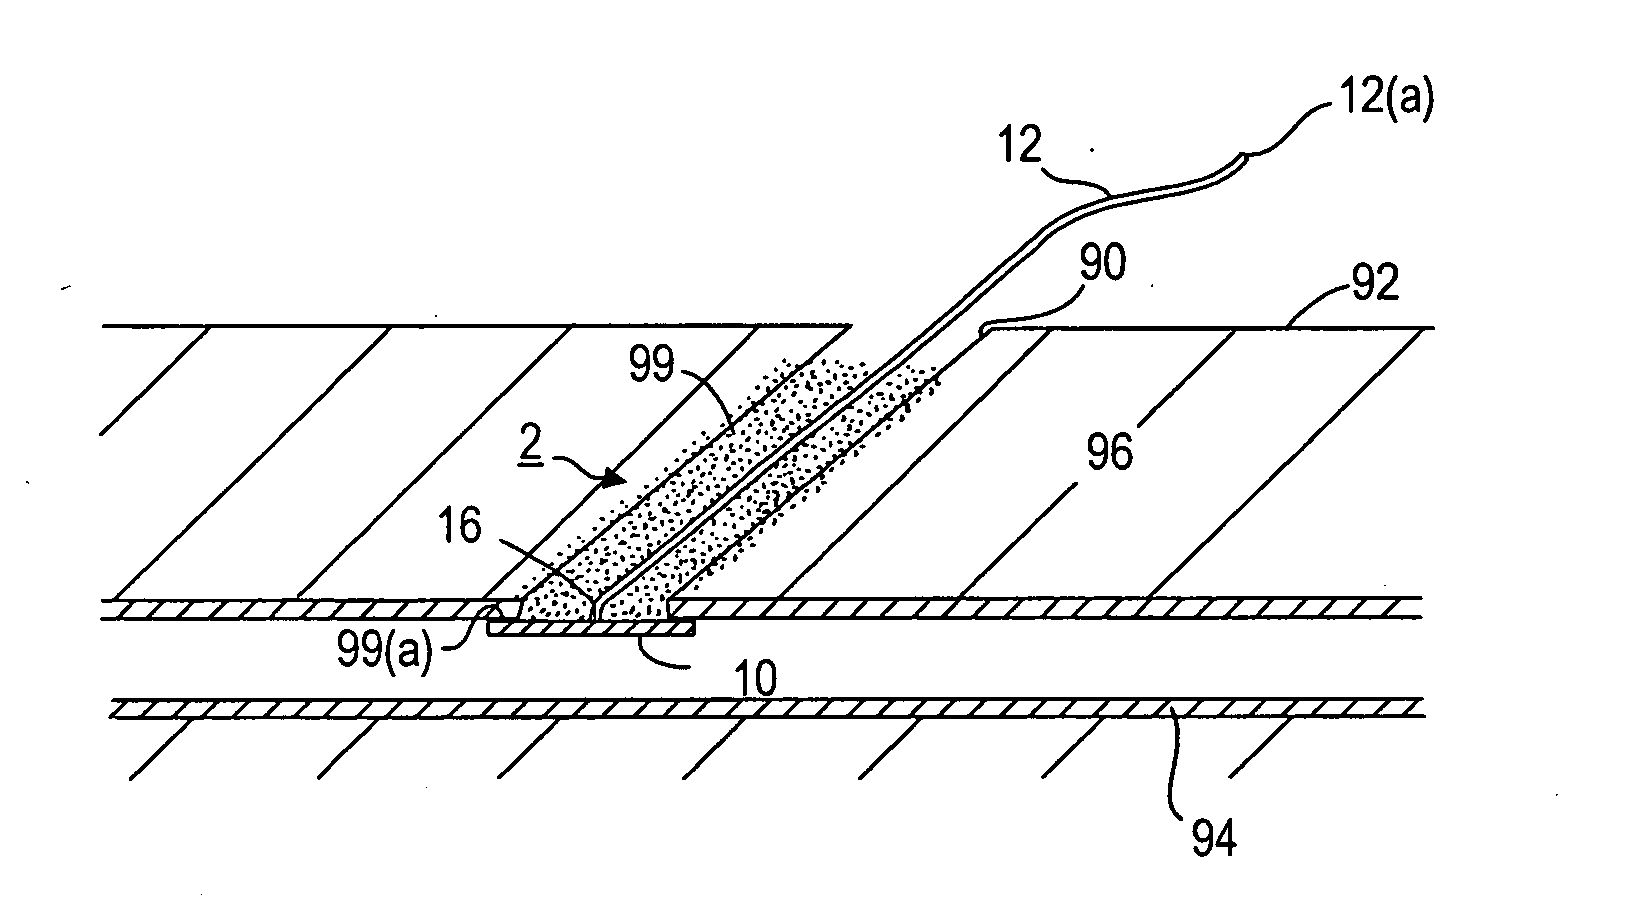 Apparatus and methods for facilitating hemostasis within a vascular puncture